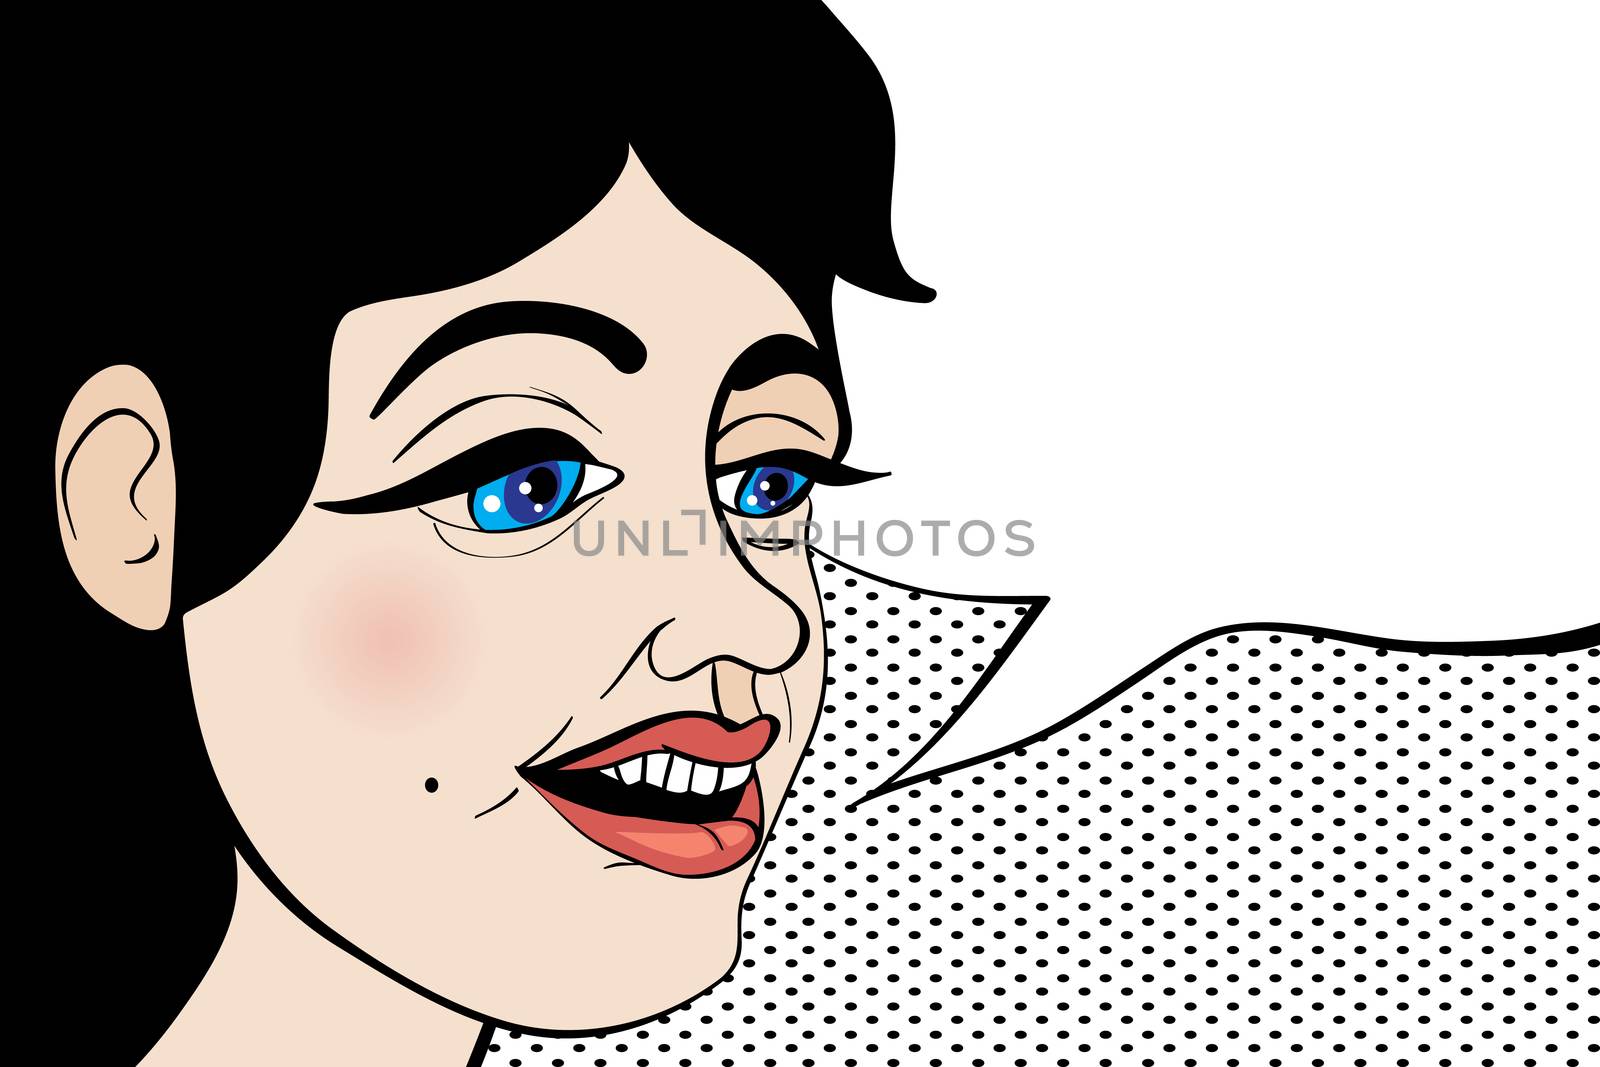 Hand drawn illustration of a girl speaking with a blank speech bubble, Pop Art style colored drawing over a background with dots